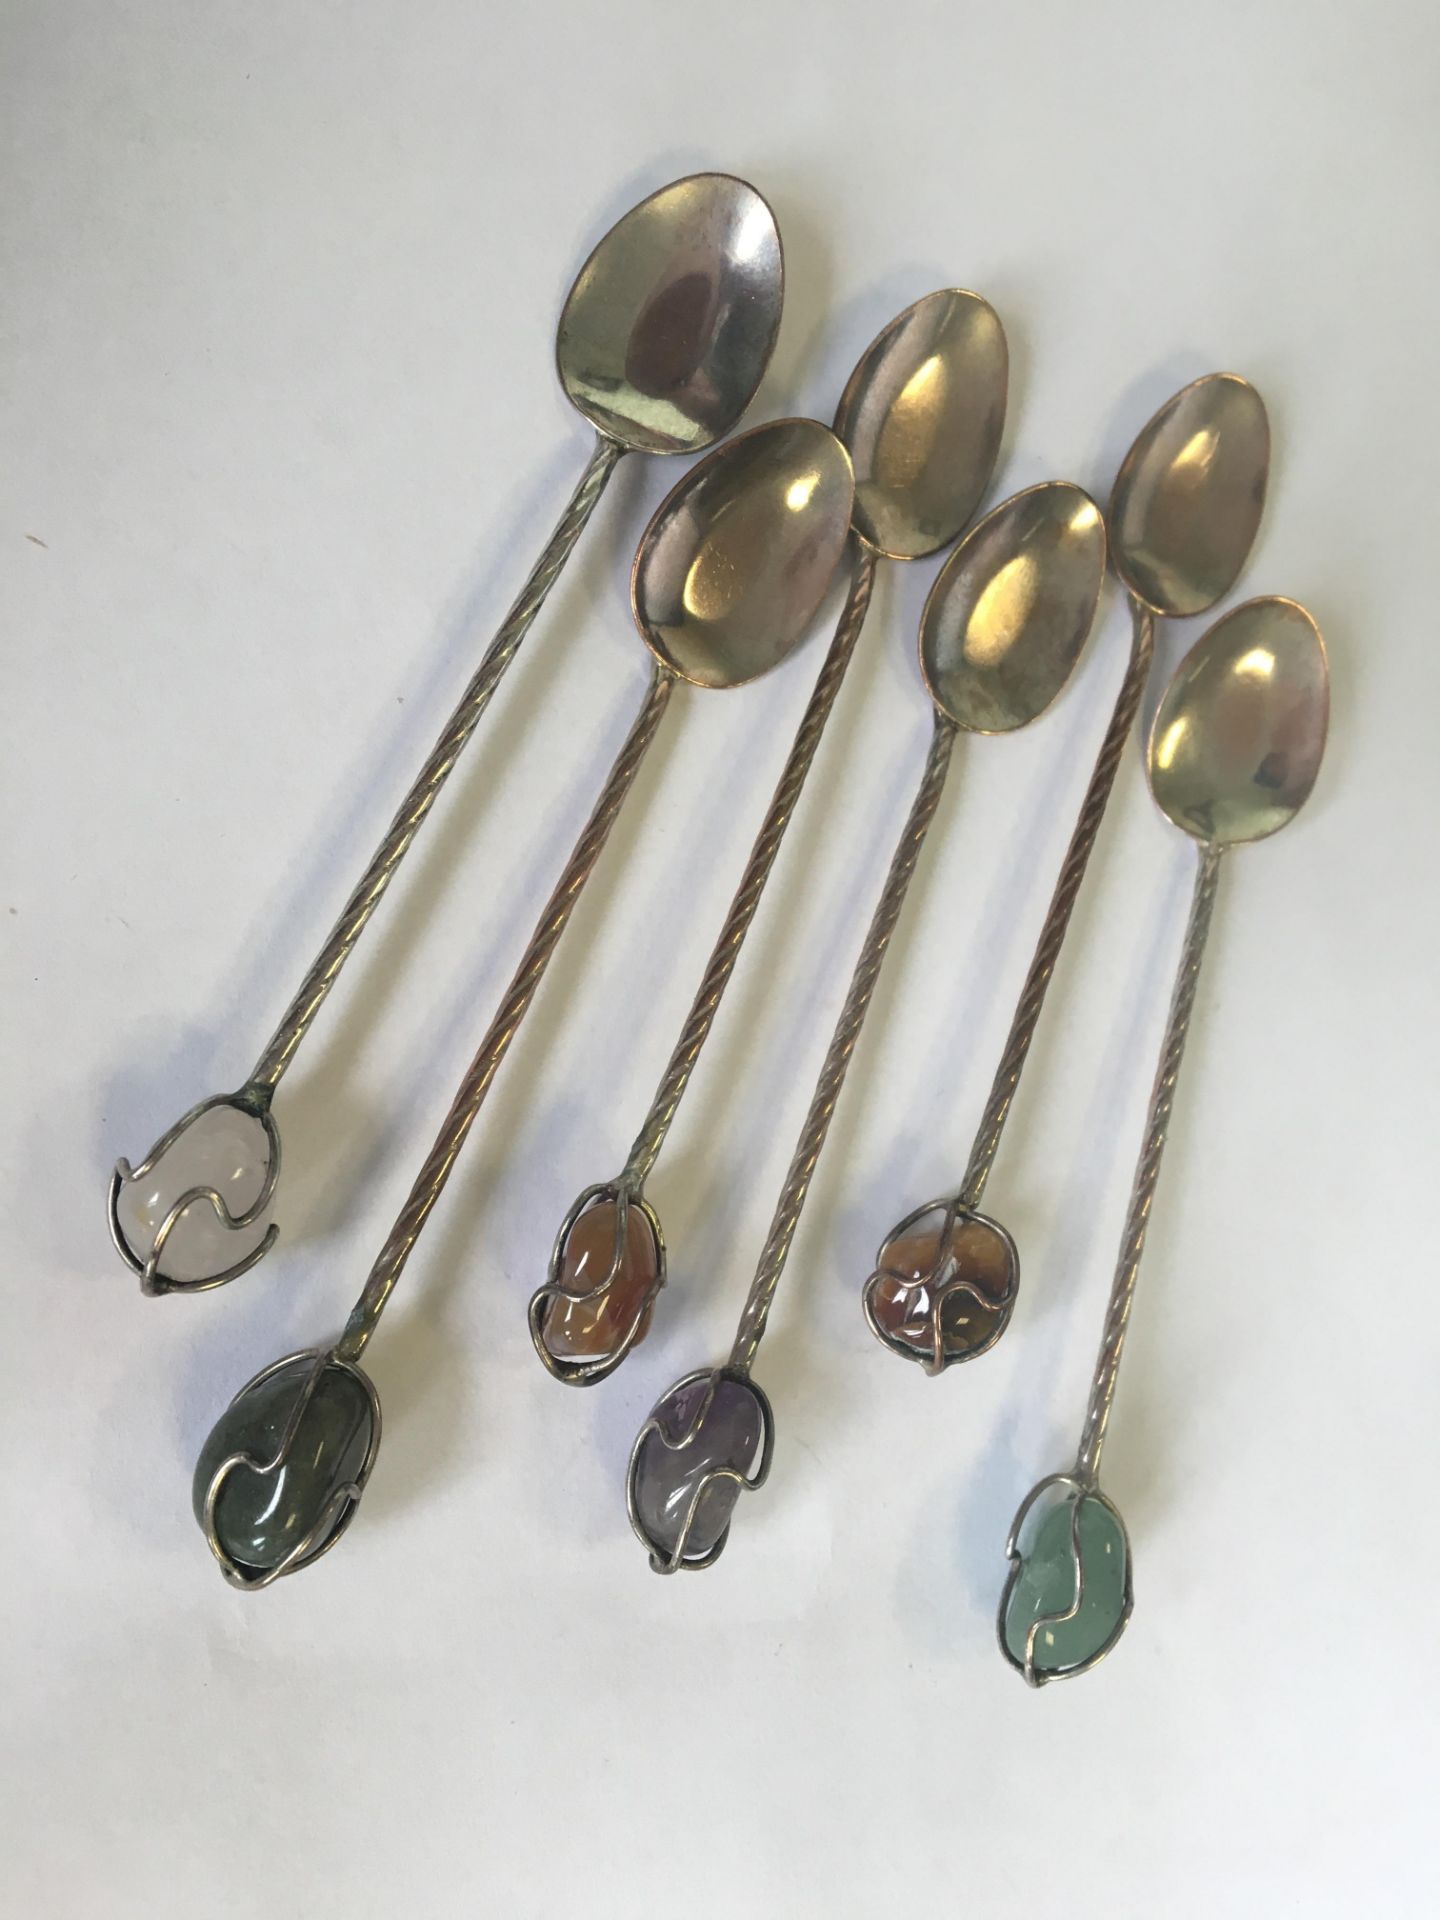 AN INTERESTING SET OF SIX DEMITASSE SPOONS WITH SEMI-PRECIOUS STONE FINIALS. FREE UK DELIVERY. - Image 2 of 2